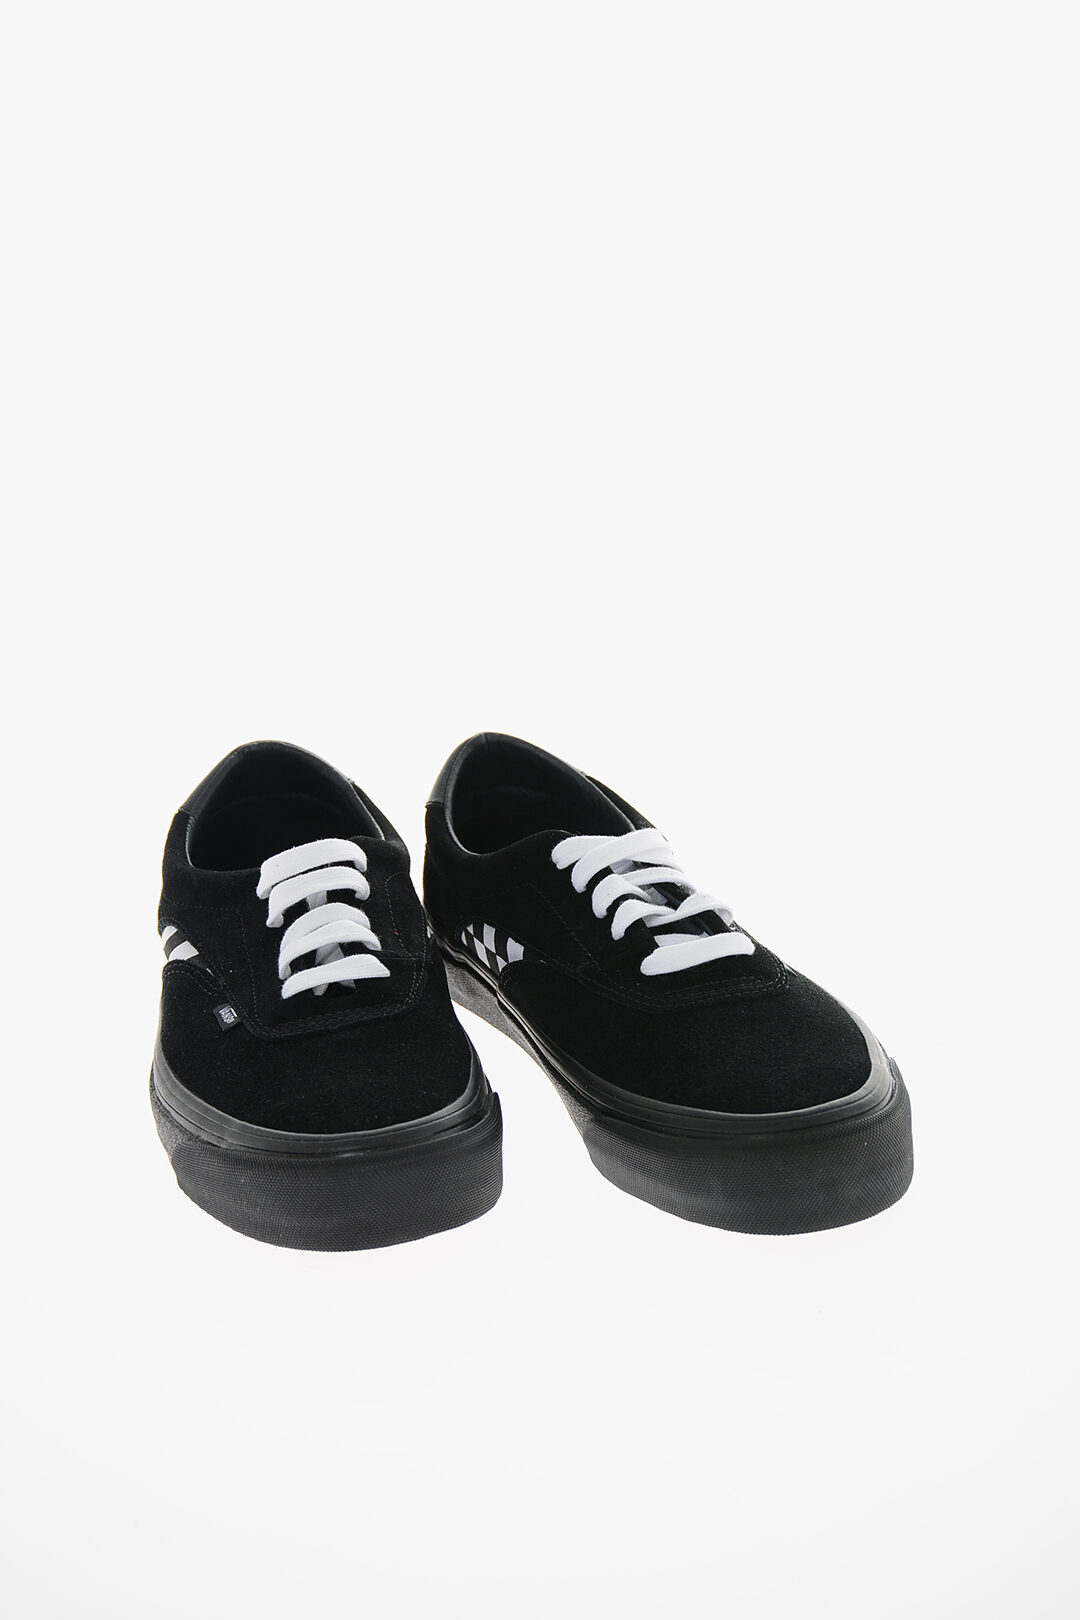 Vans Leather NI SP Sneakers with Canvas Checkerboard Details men - Glamood Outlet